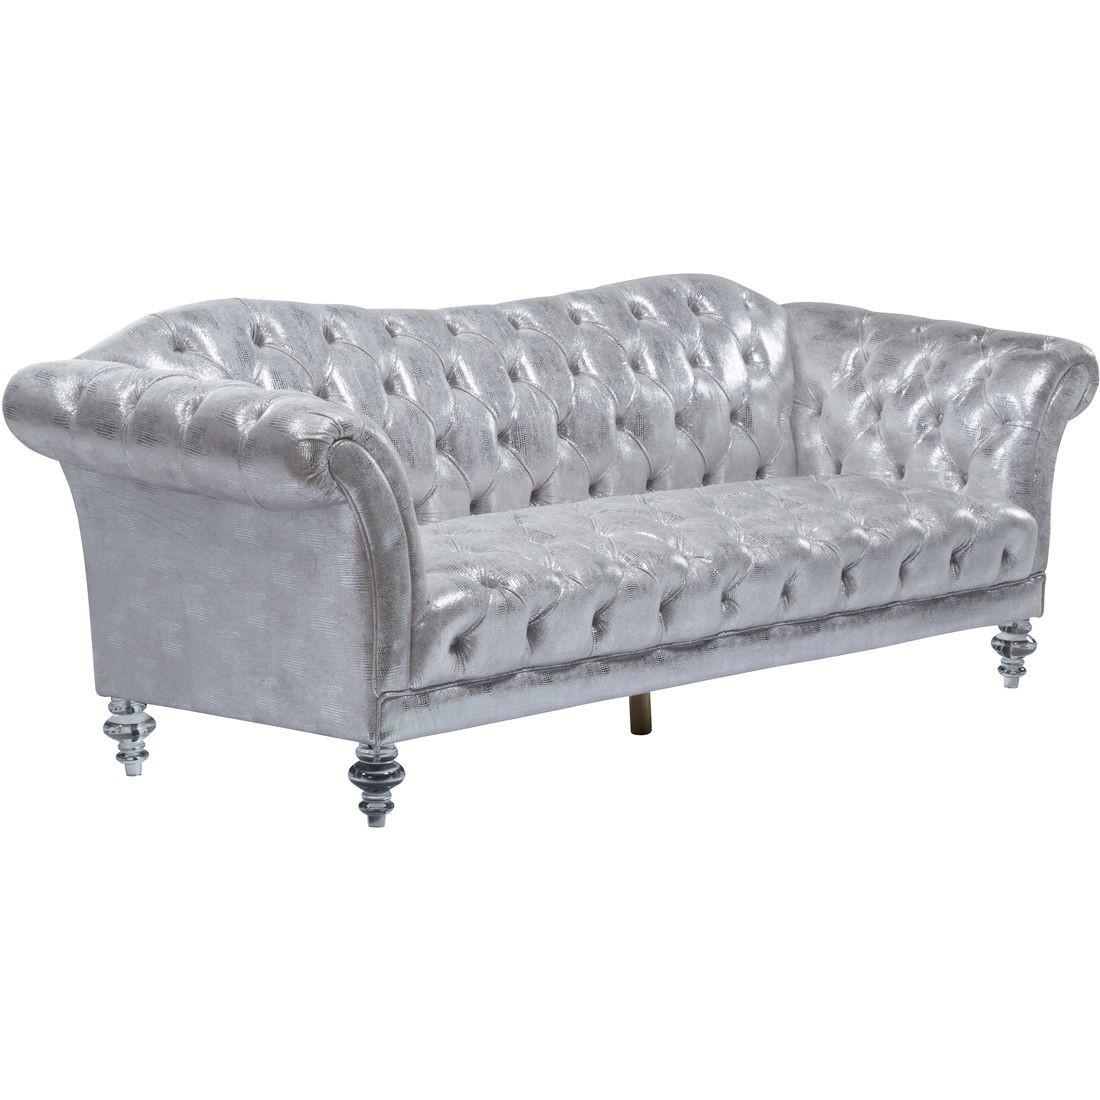 Classic, Vintage Sofa Dixie 52780 in Silver Fabric